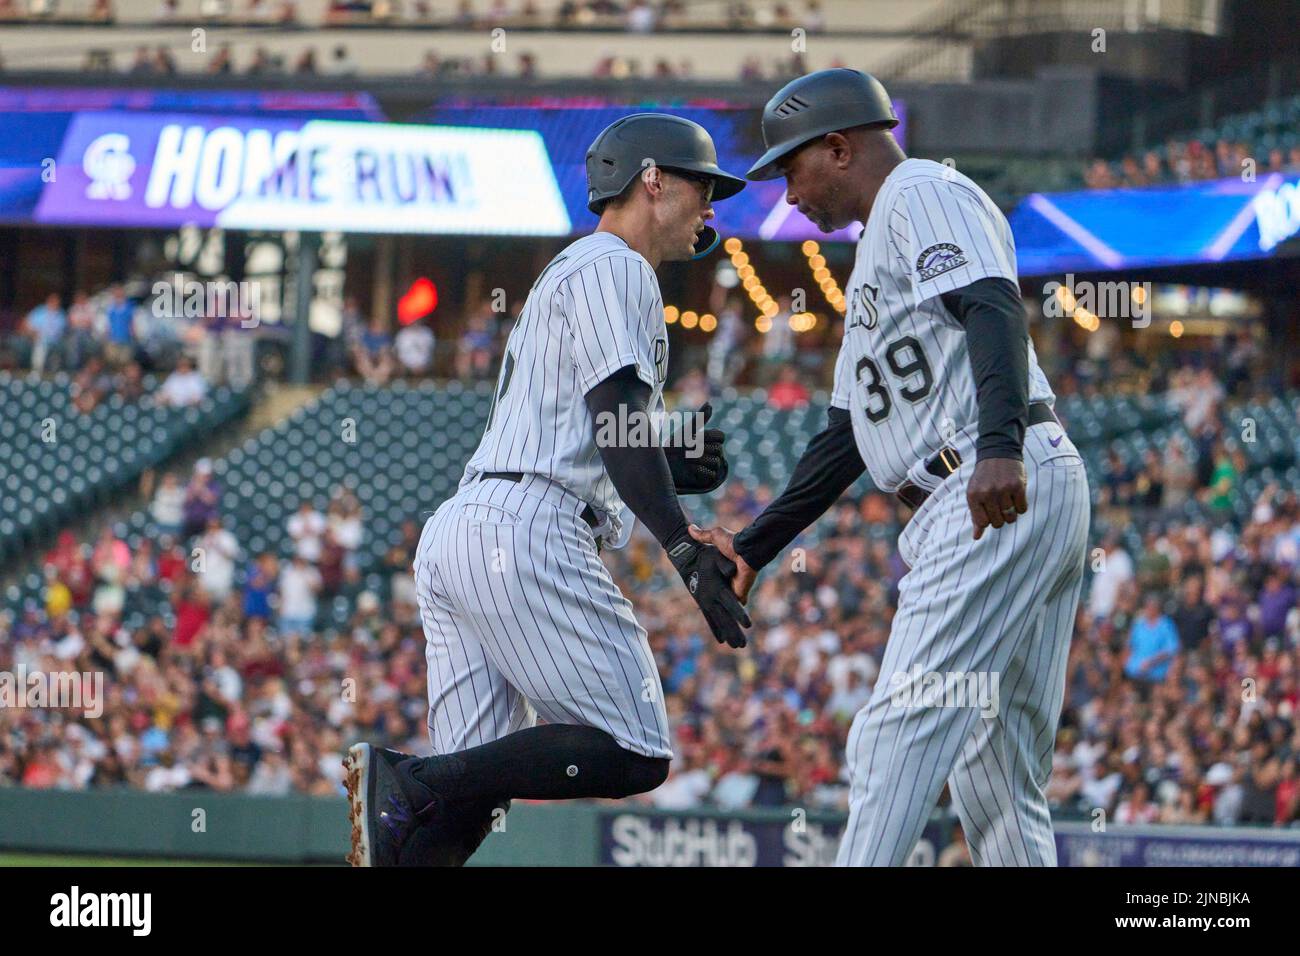 August 9 2022: Colorado center fielder Randall Grichuk (15) hits a homer one of his five hits during the game with Saint Louis Cardinals and Colorado Rockies held at Coors Field in Denver Co. David Seelig/Cal Sport Medi Stock Photo